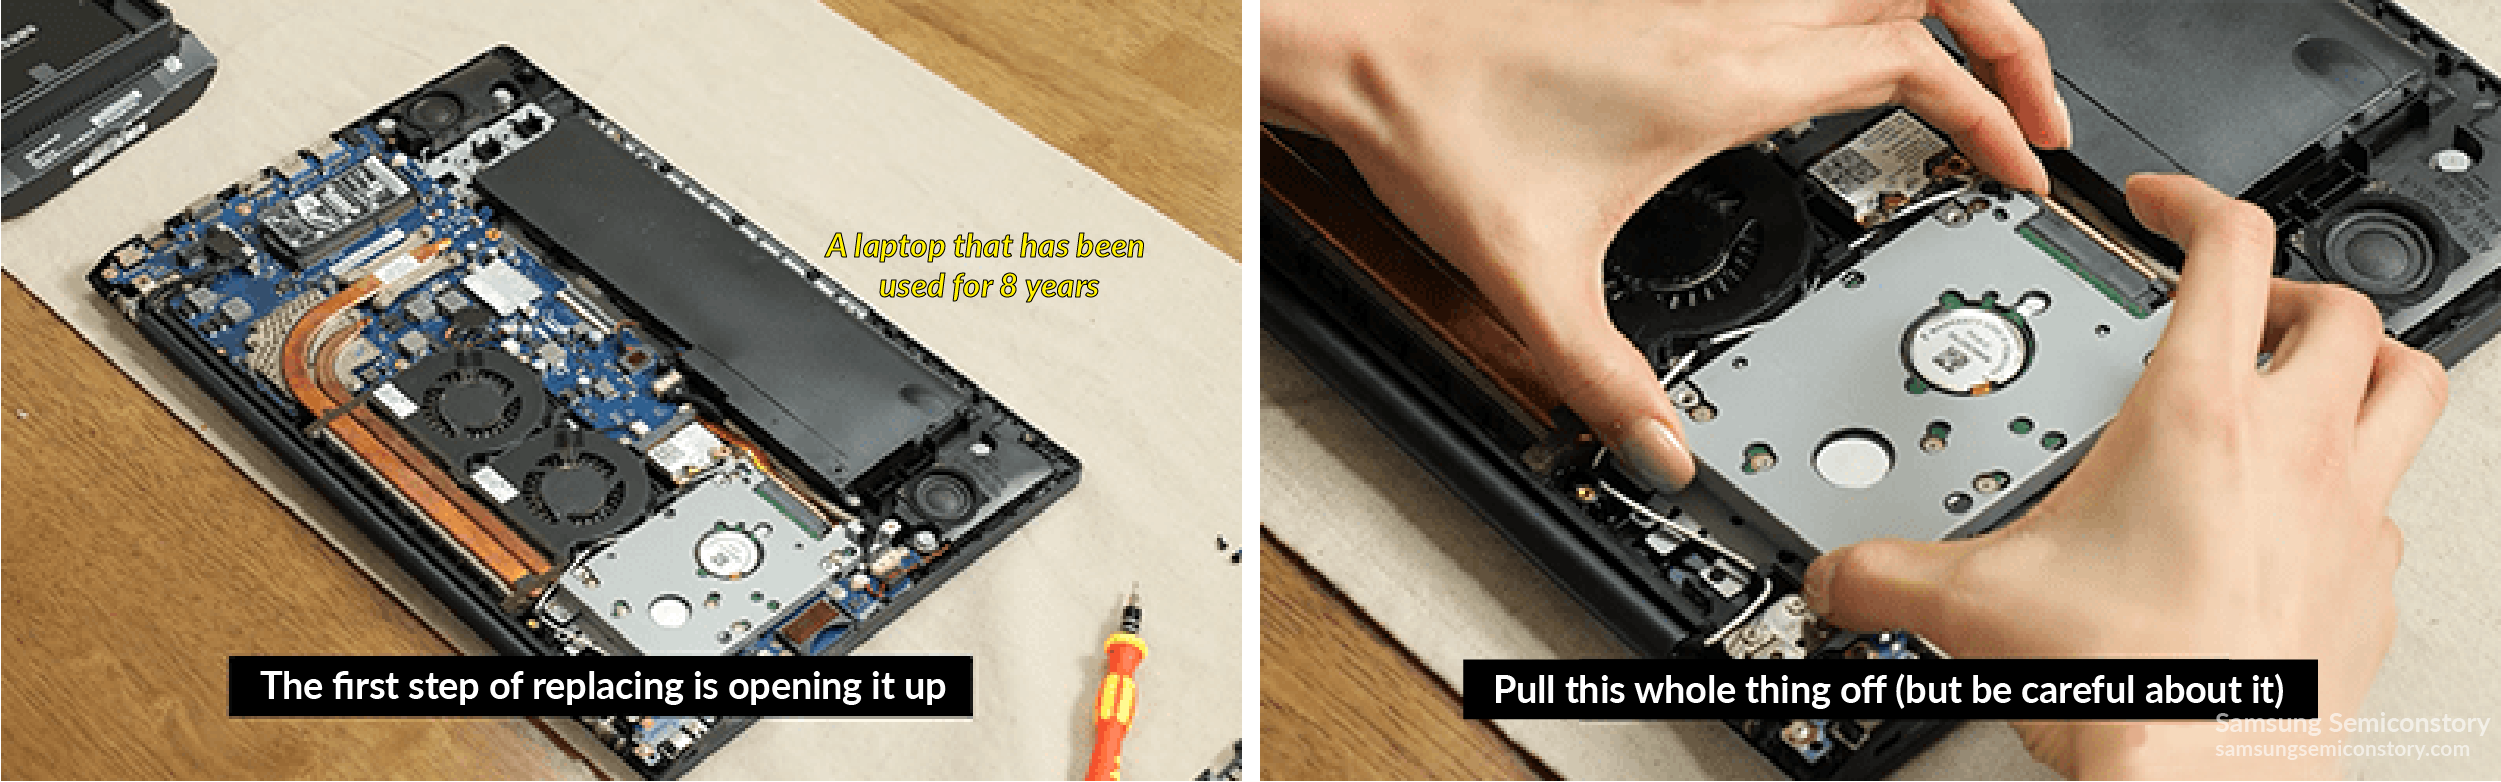 Upgrade HDD to SSD, Techblog